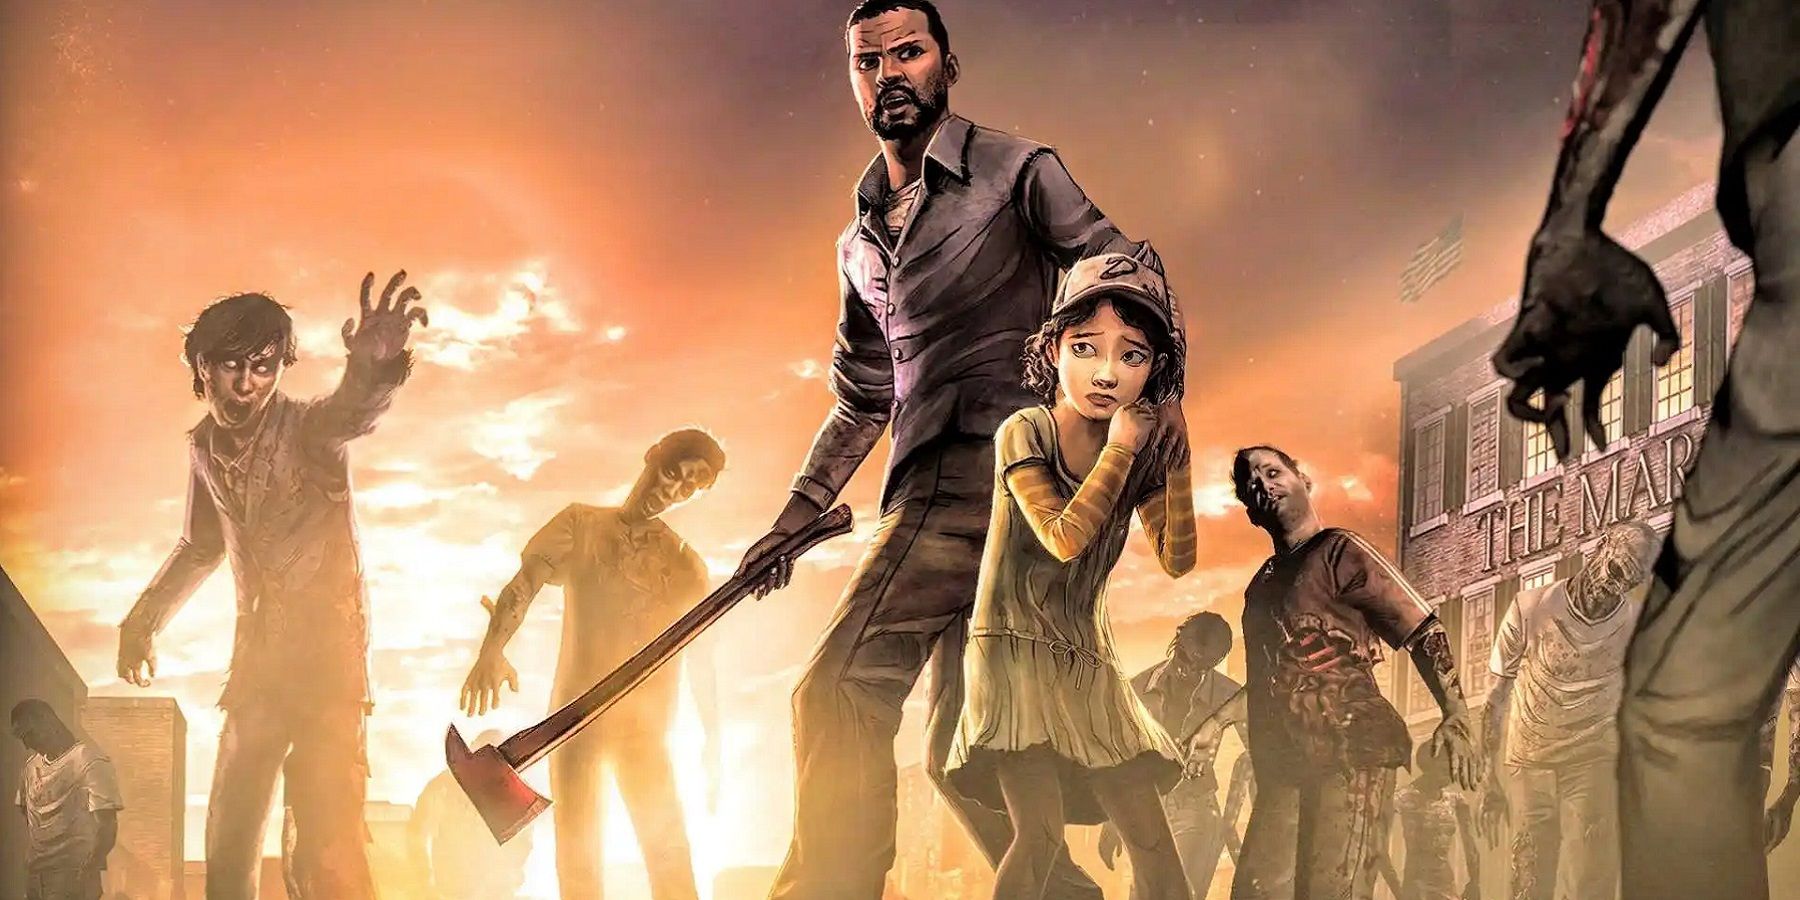 Image of Lee and Clementine from The Walking Dead: Season One surrounded by zombies.